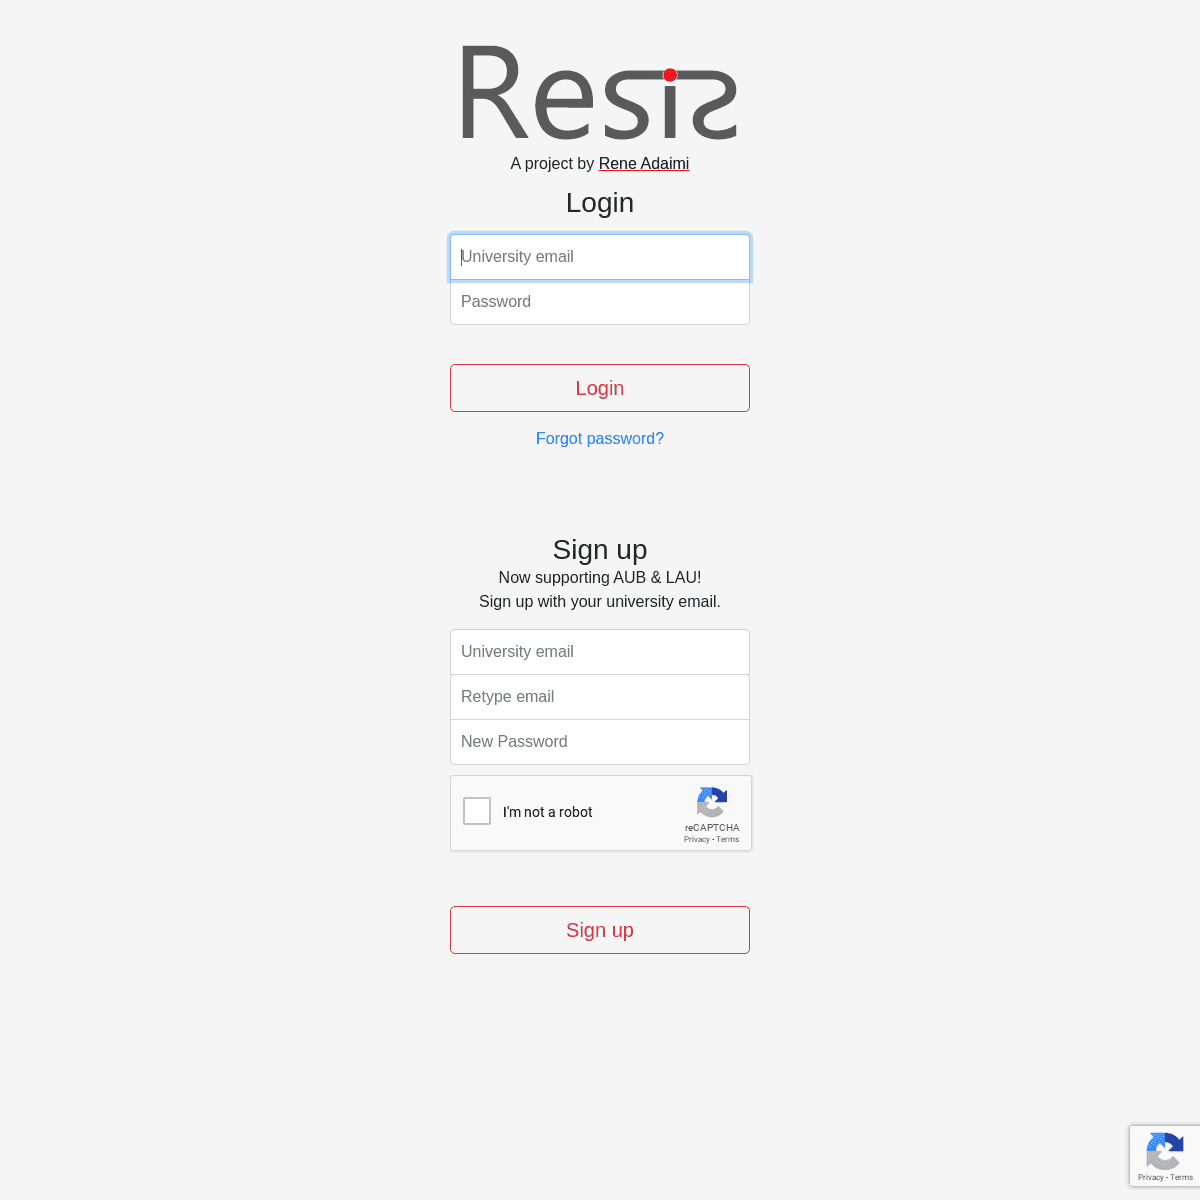 A complete backup of resis.org